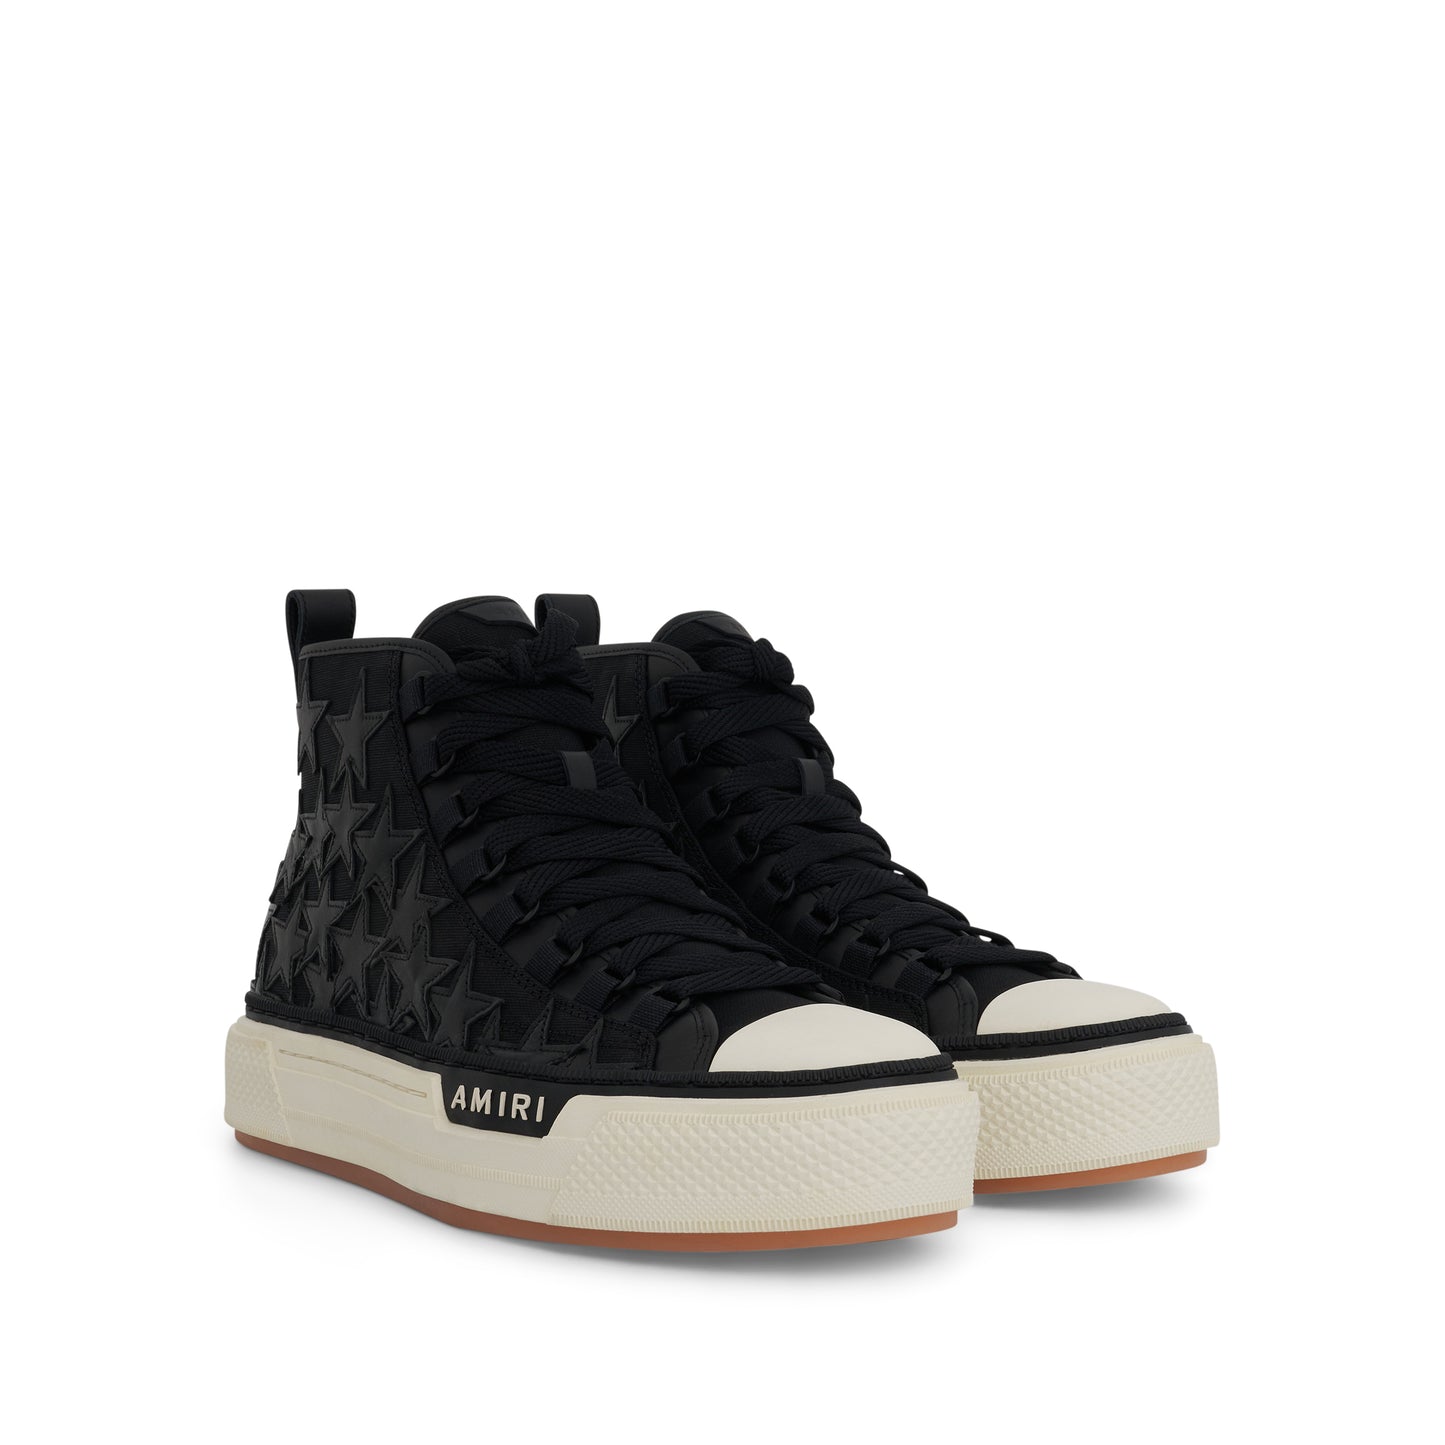 Stars High Court Sneakers in Black/White